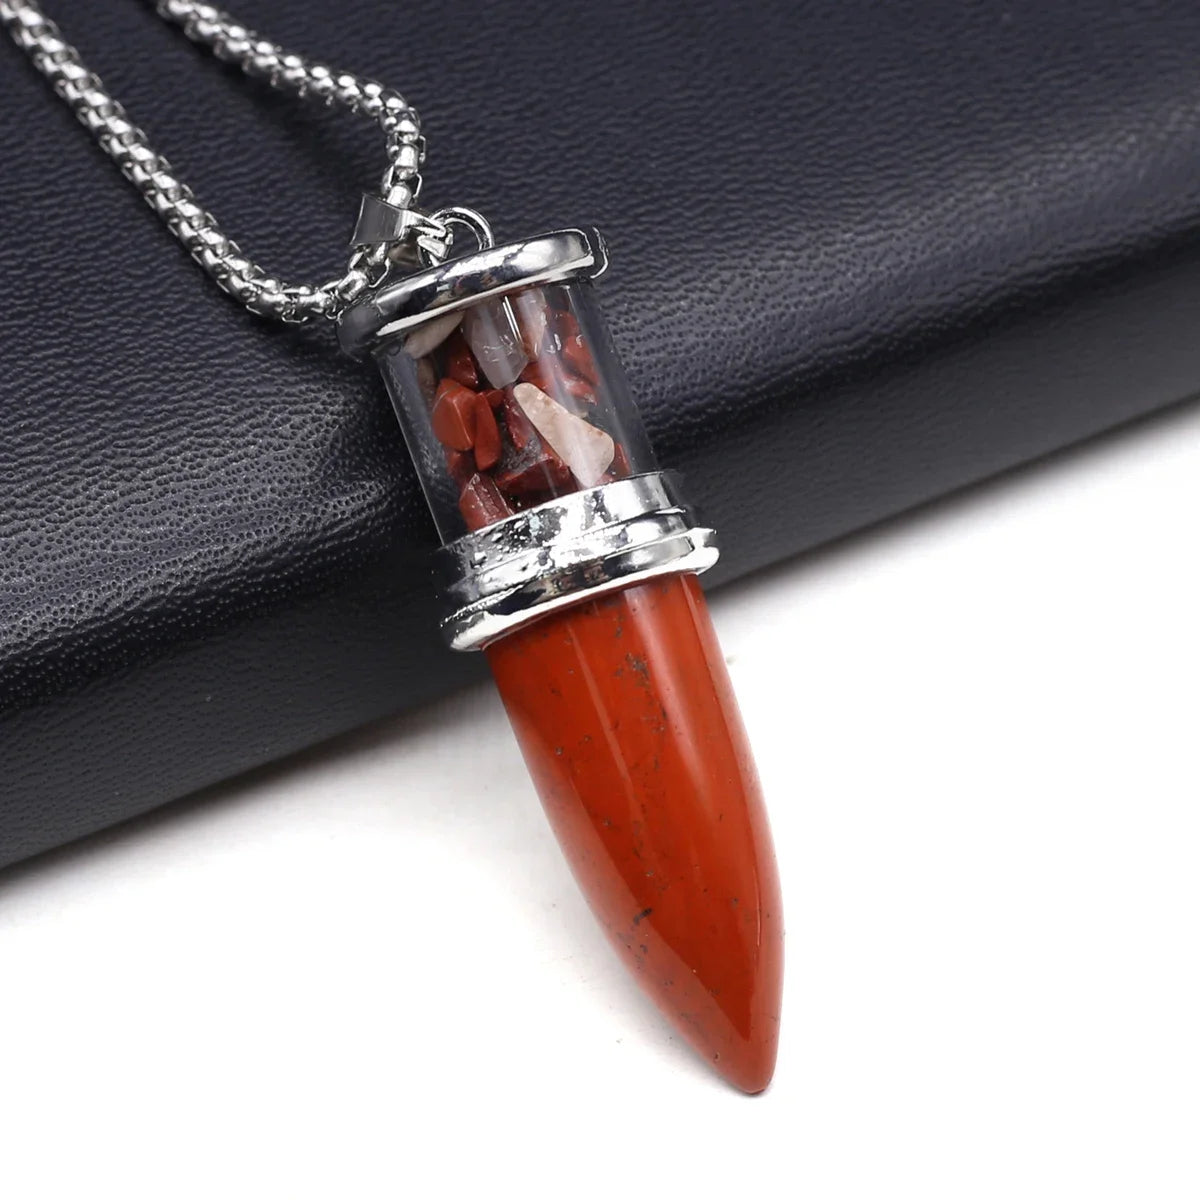 Bullet Shape Natural Stone Crystal Gravel Necklace Pendant - Red Stone - Cosmic Serenity Shop